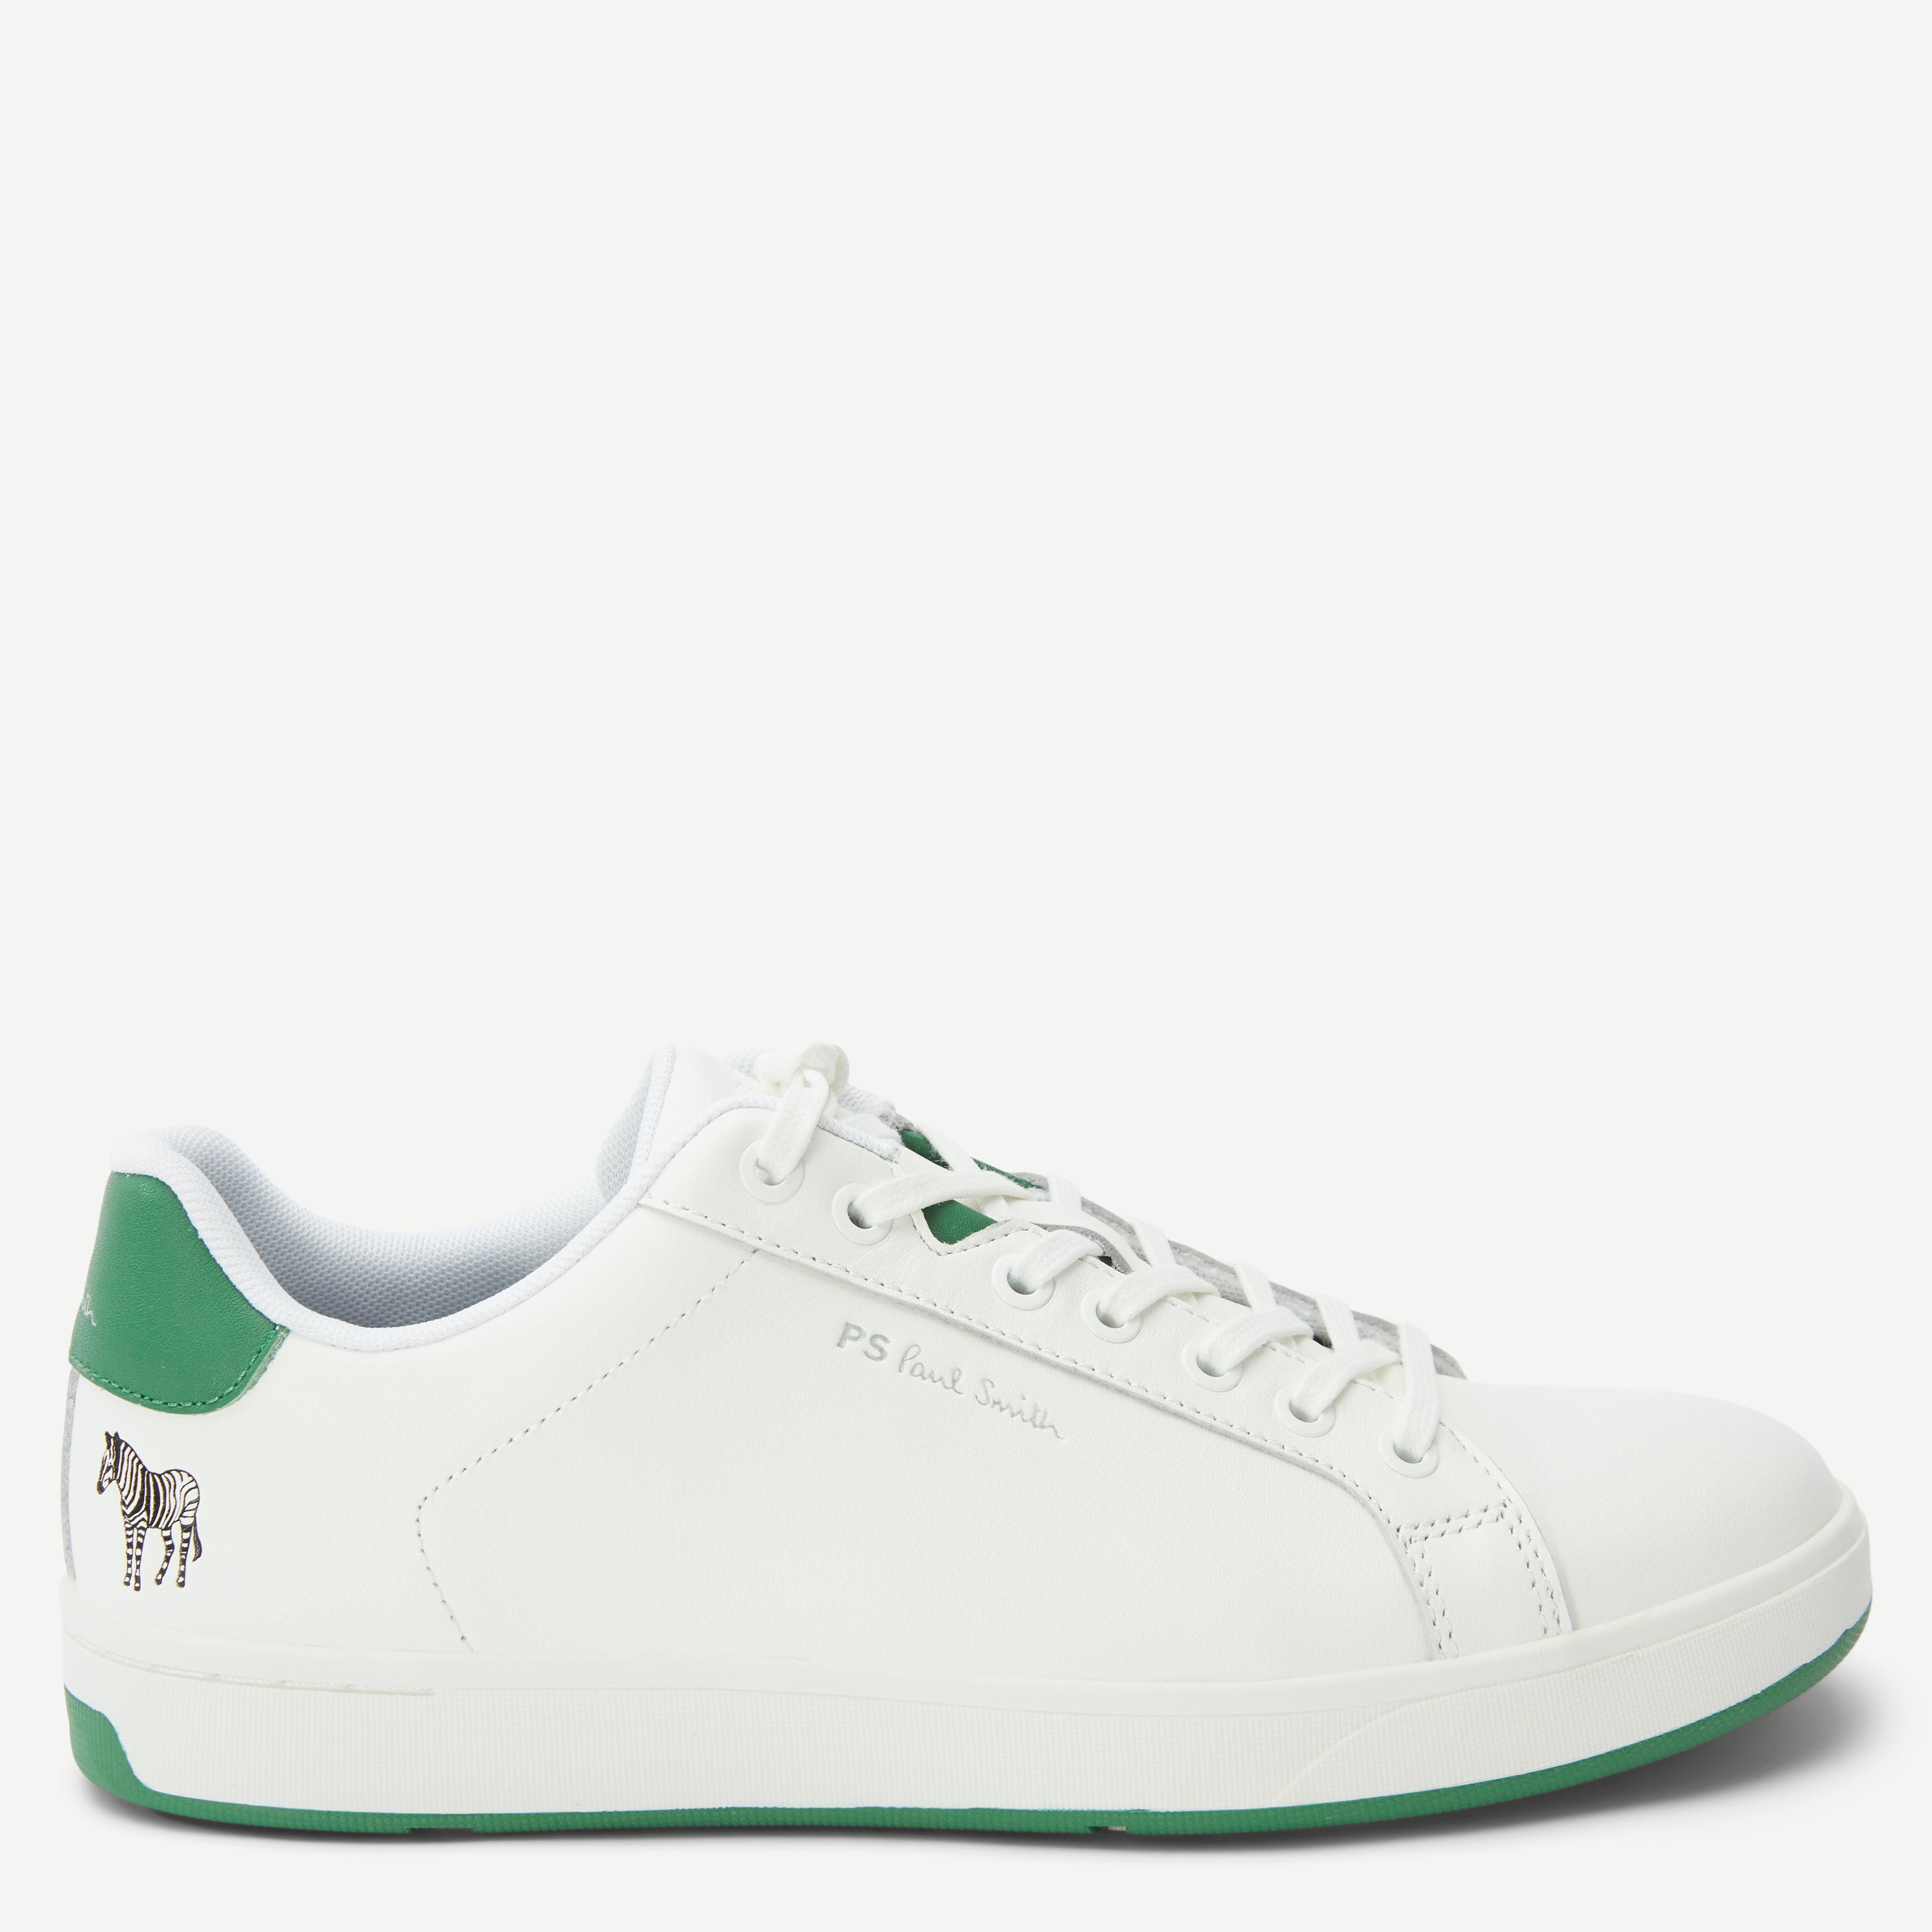 Paul Smith Shoes Shoes ALY05-MCAS MENS SHOE ALBANY WHITE GREEN SPOILER White